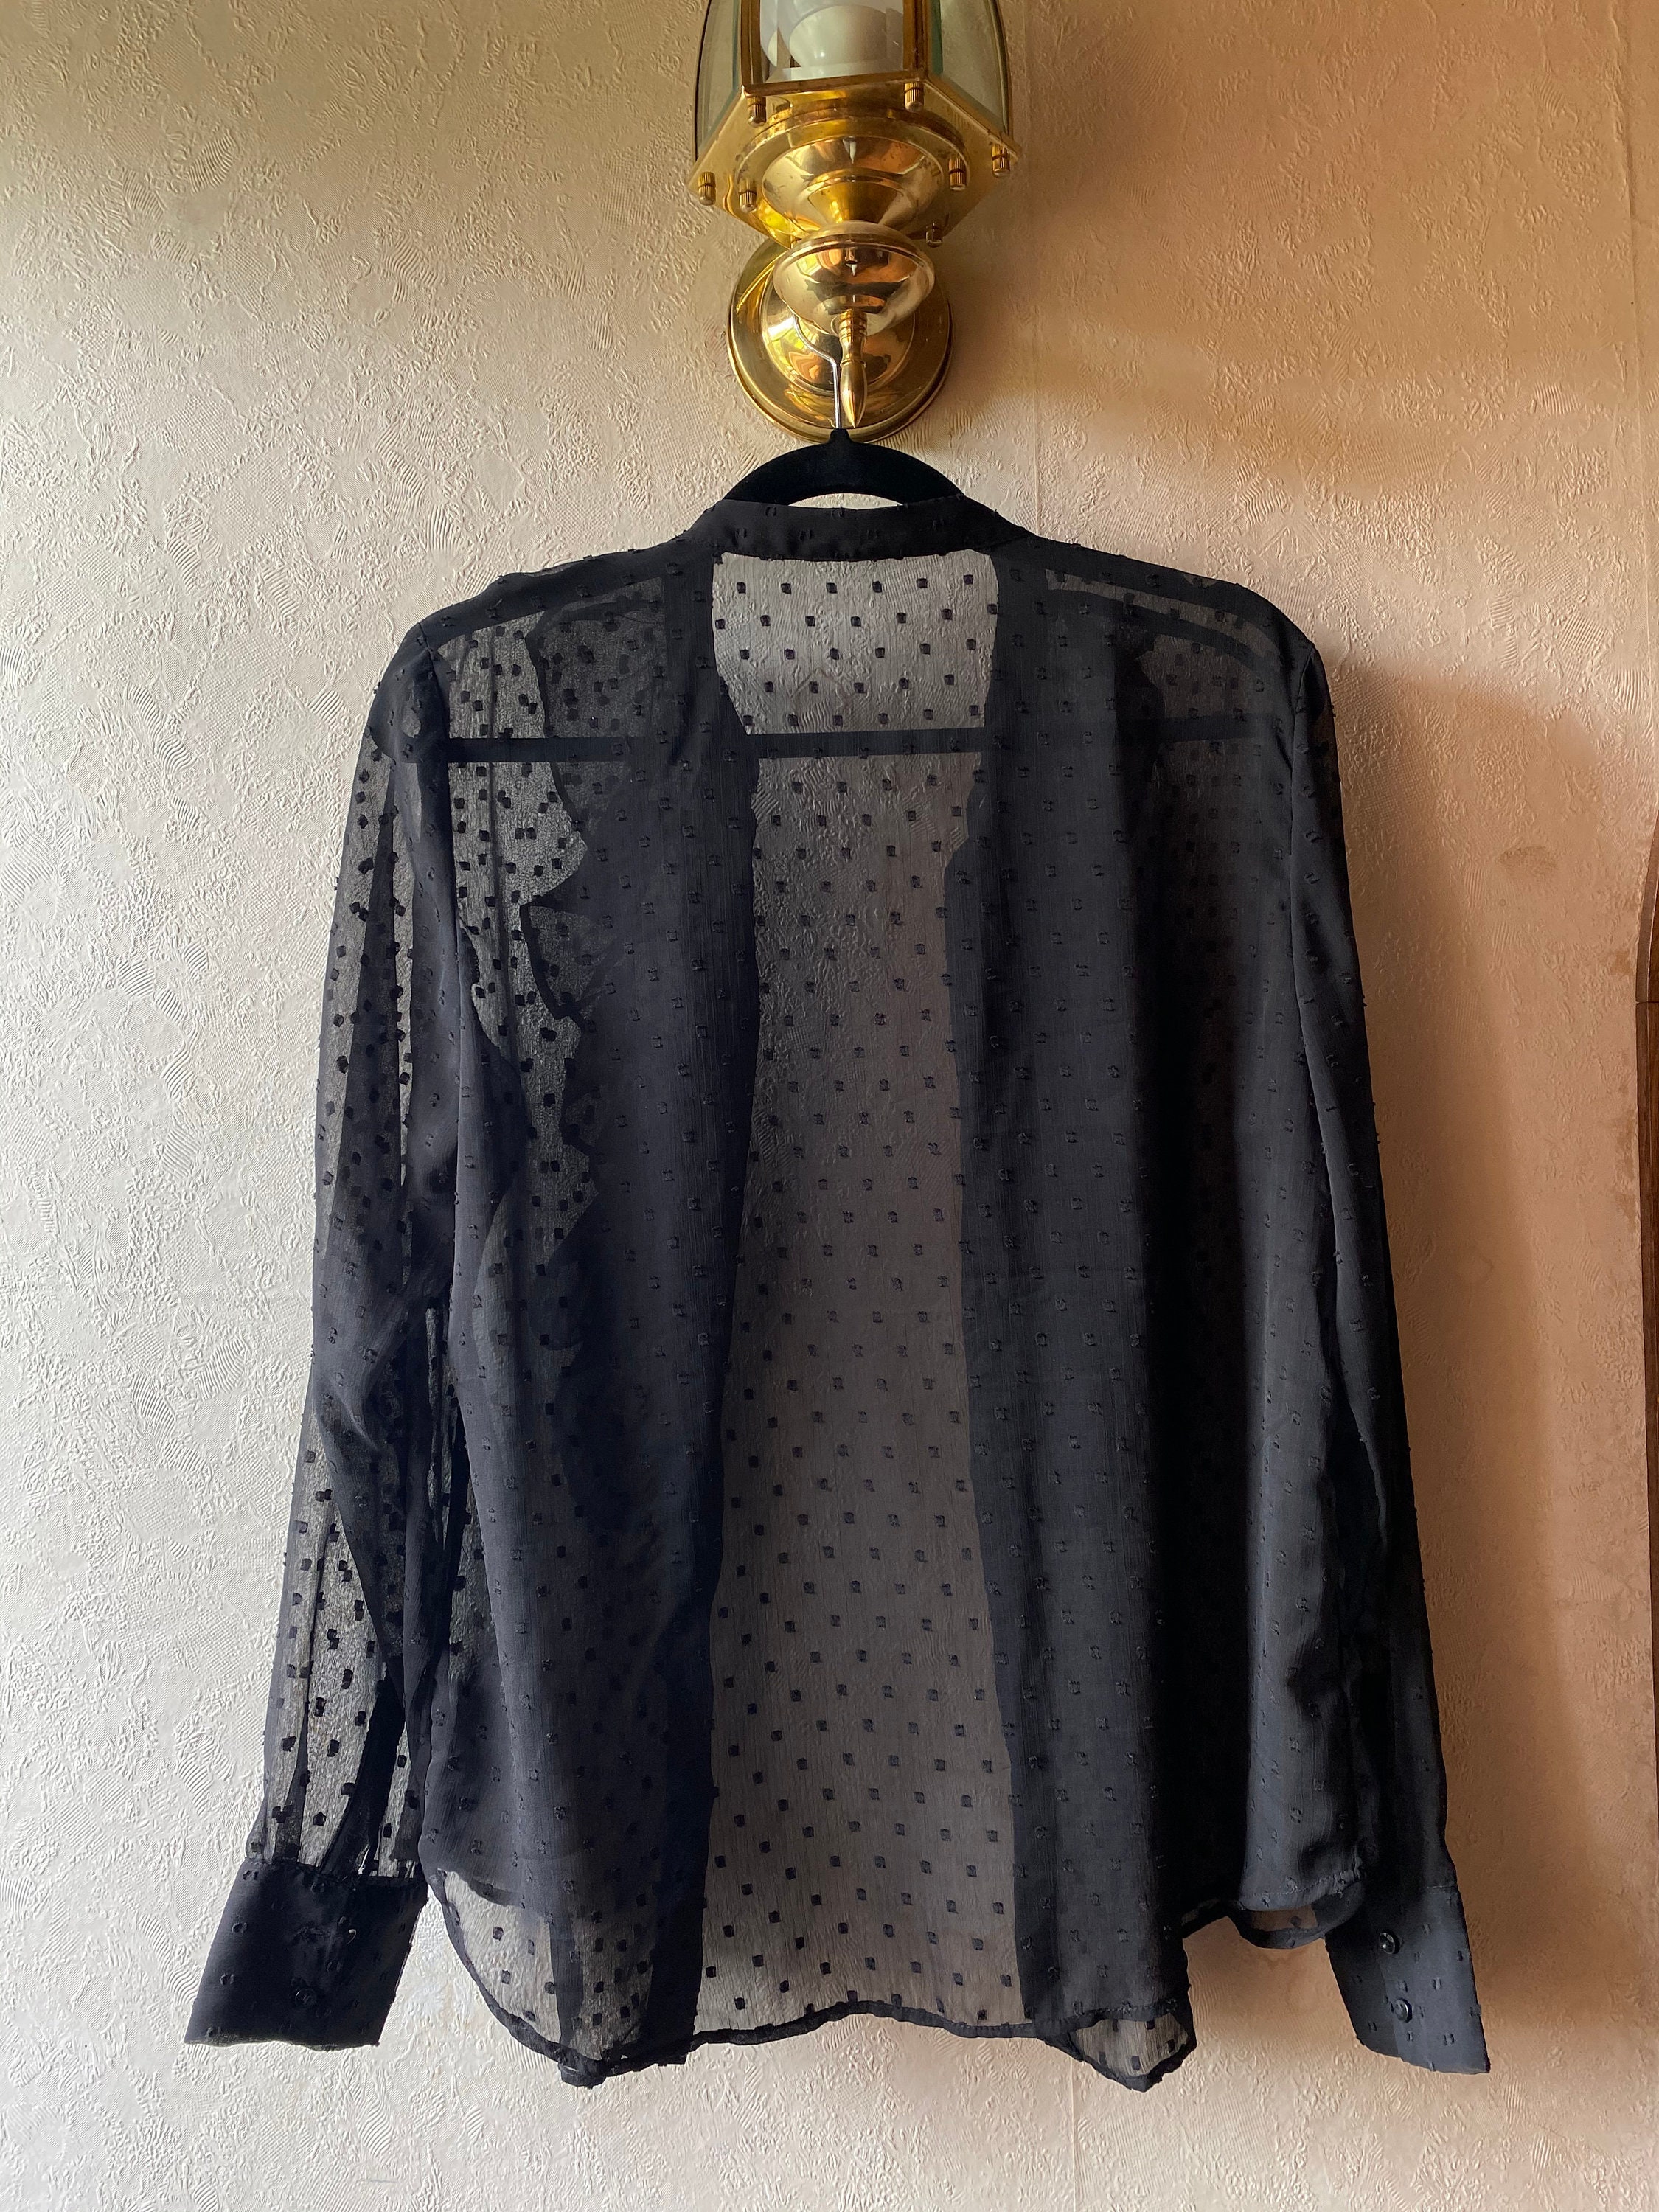 Vintage style black see through blouse with ruffles | Etsy